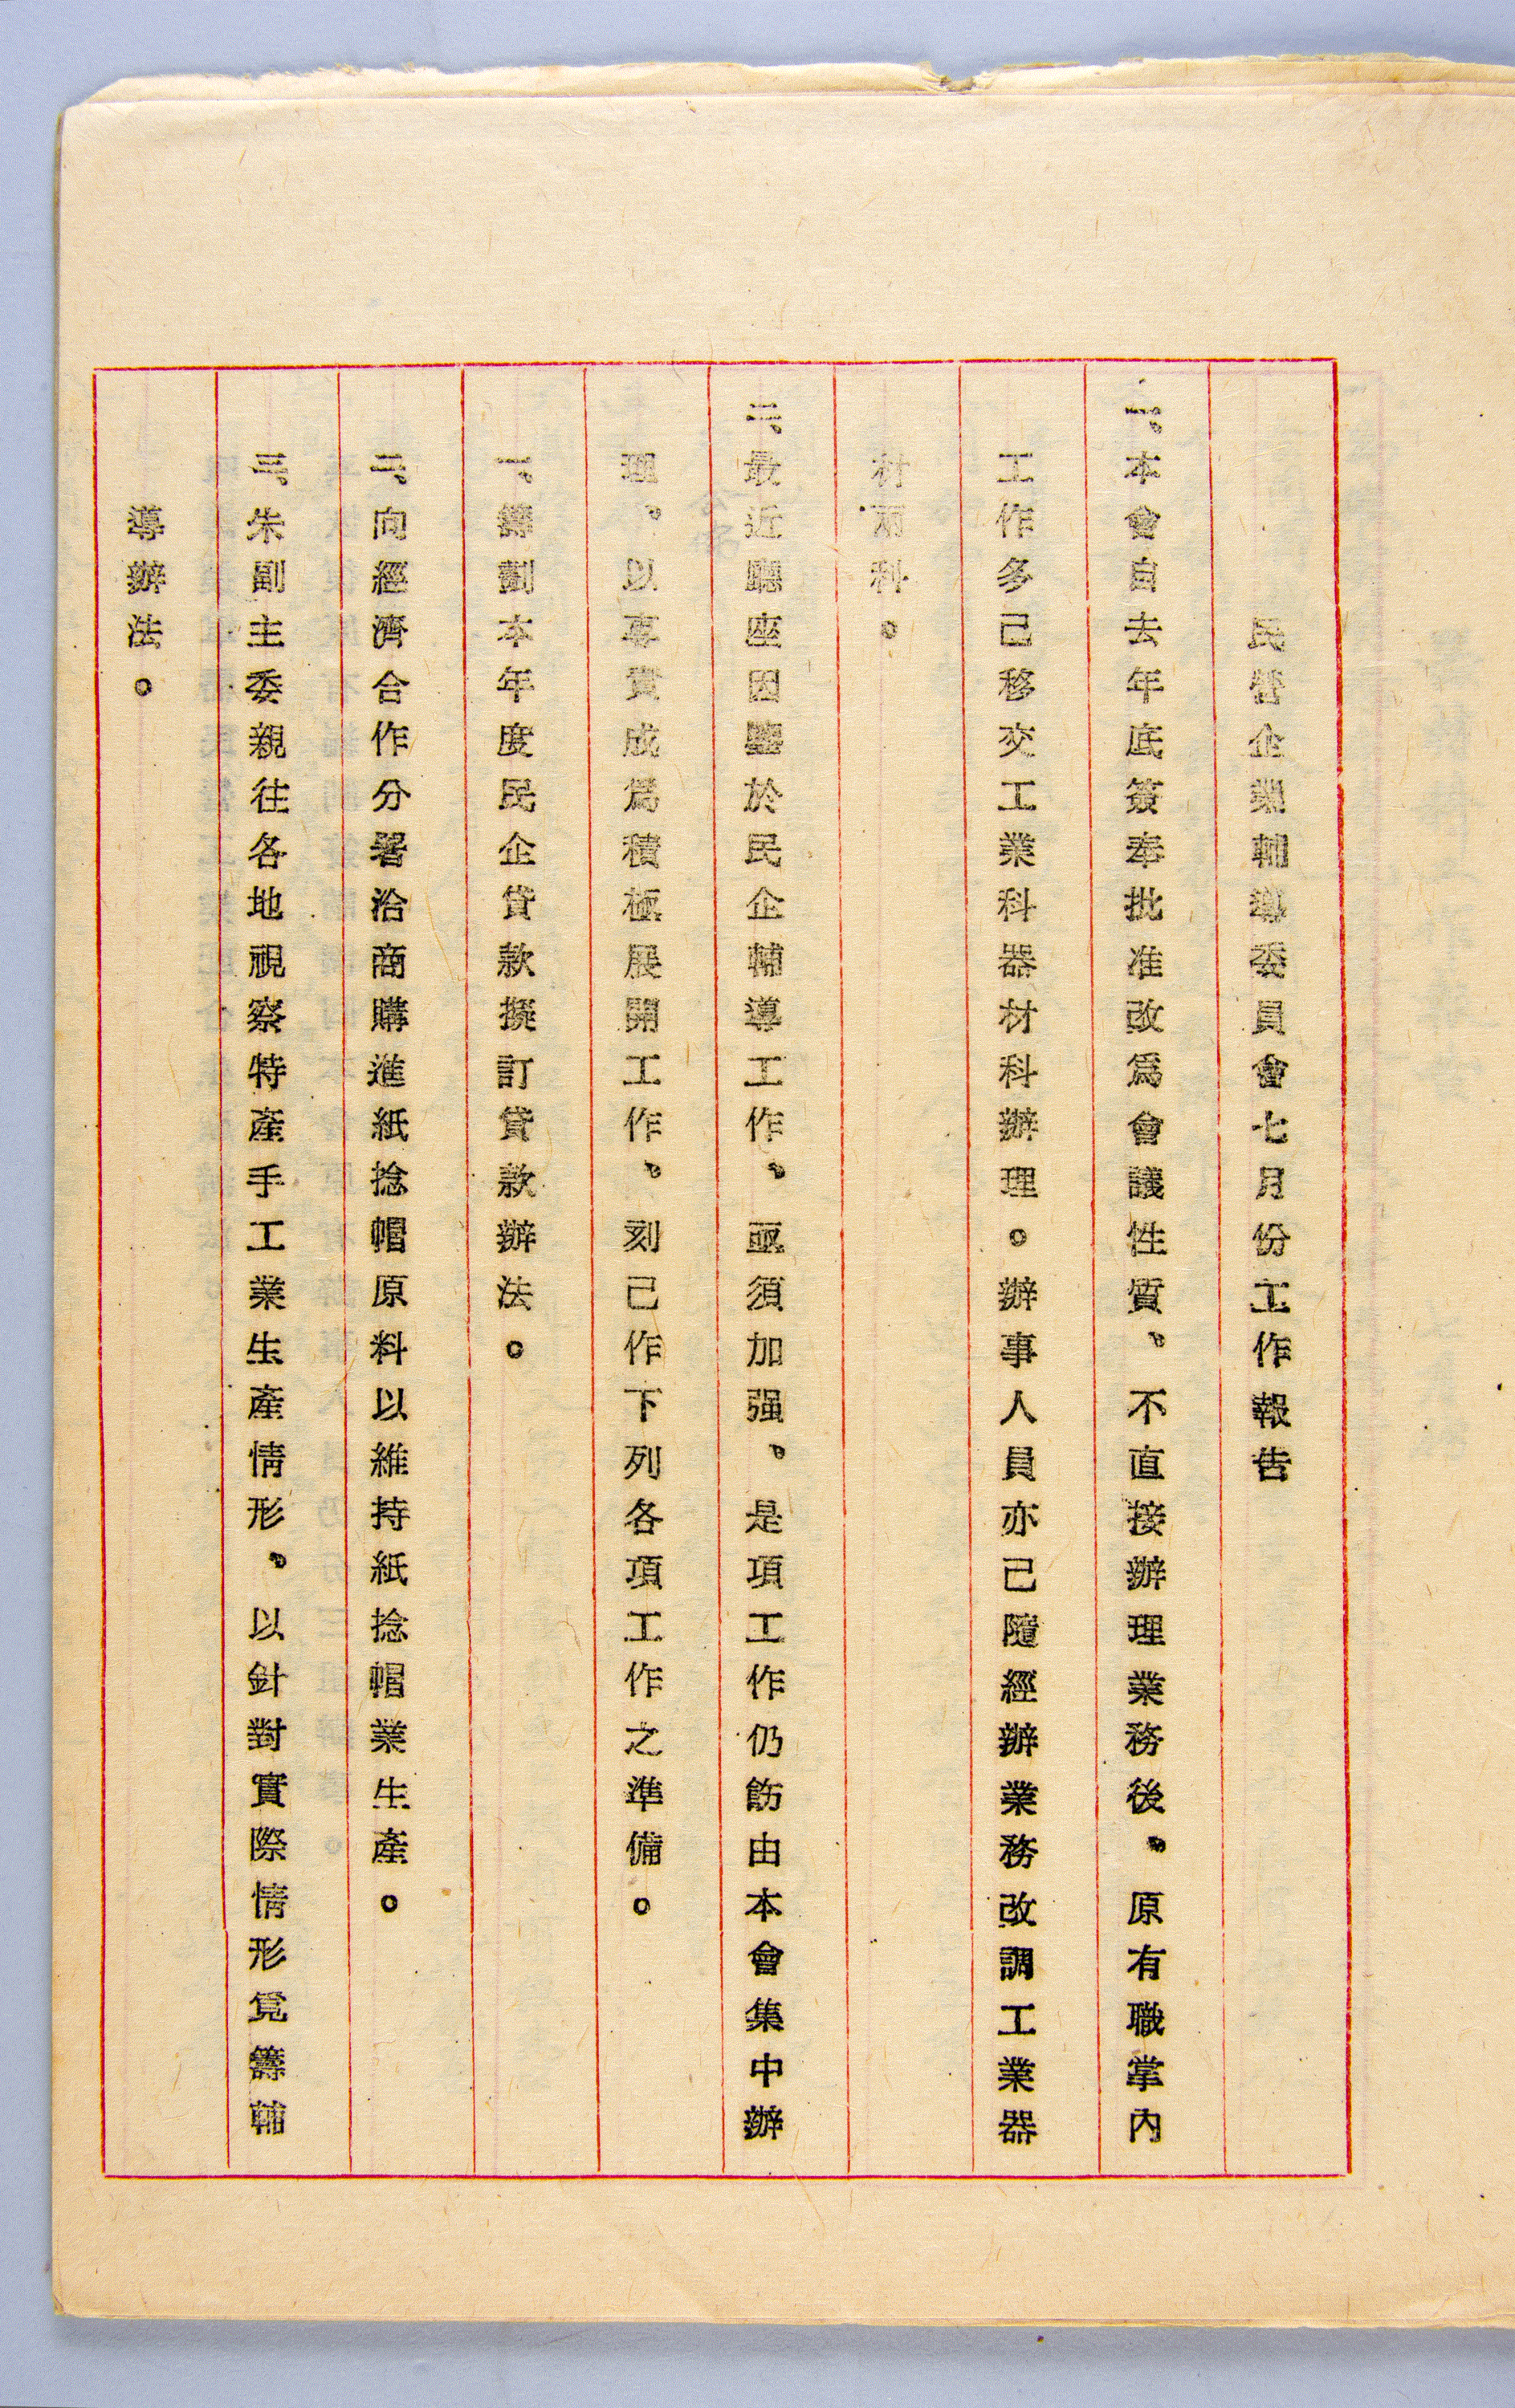 The report of the Economic Development Bureau of Taiwan Provincial Government in 1951